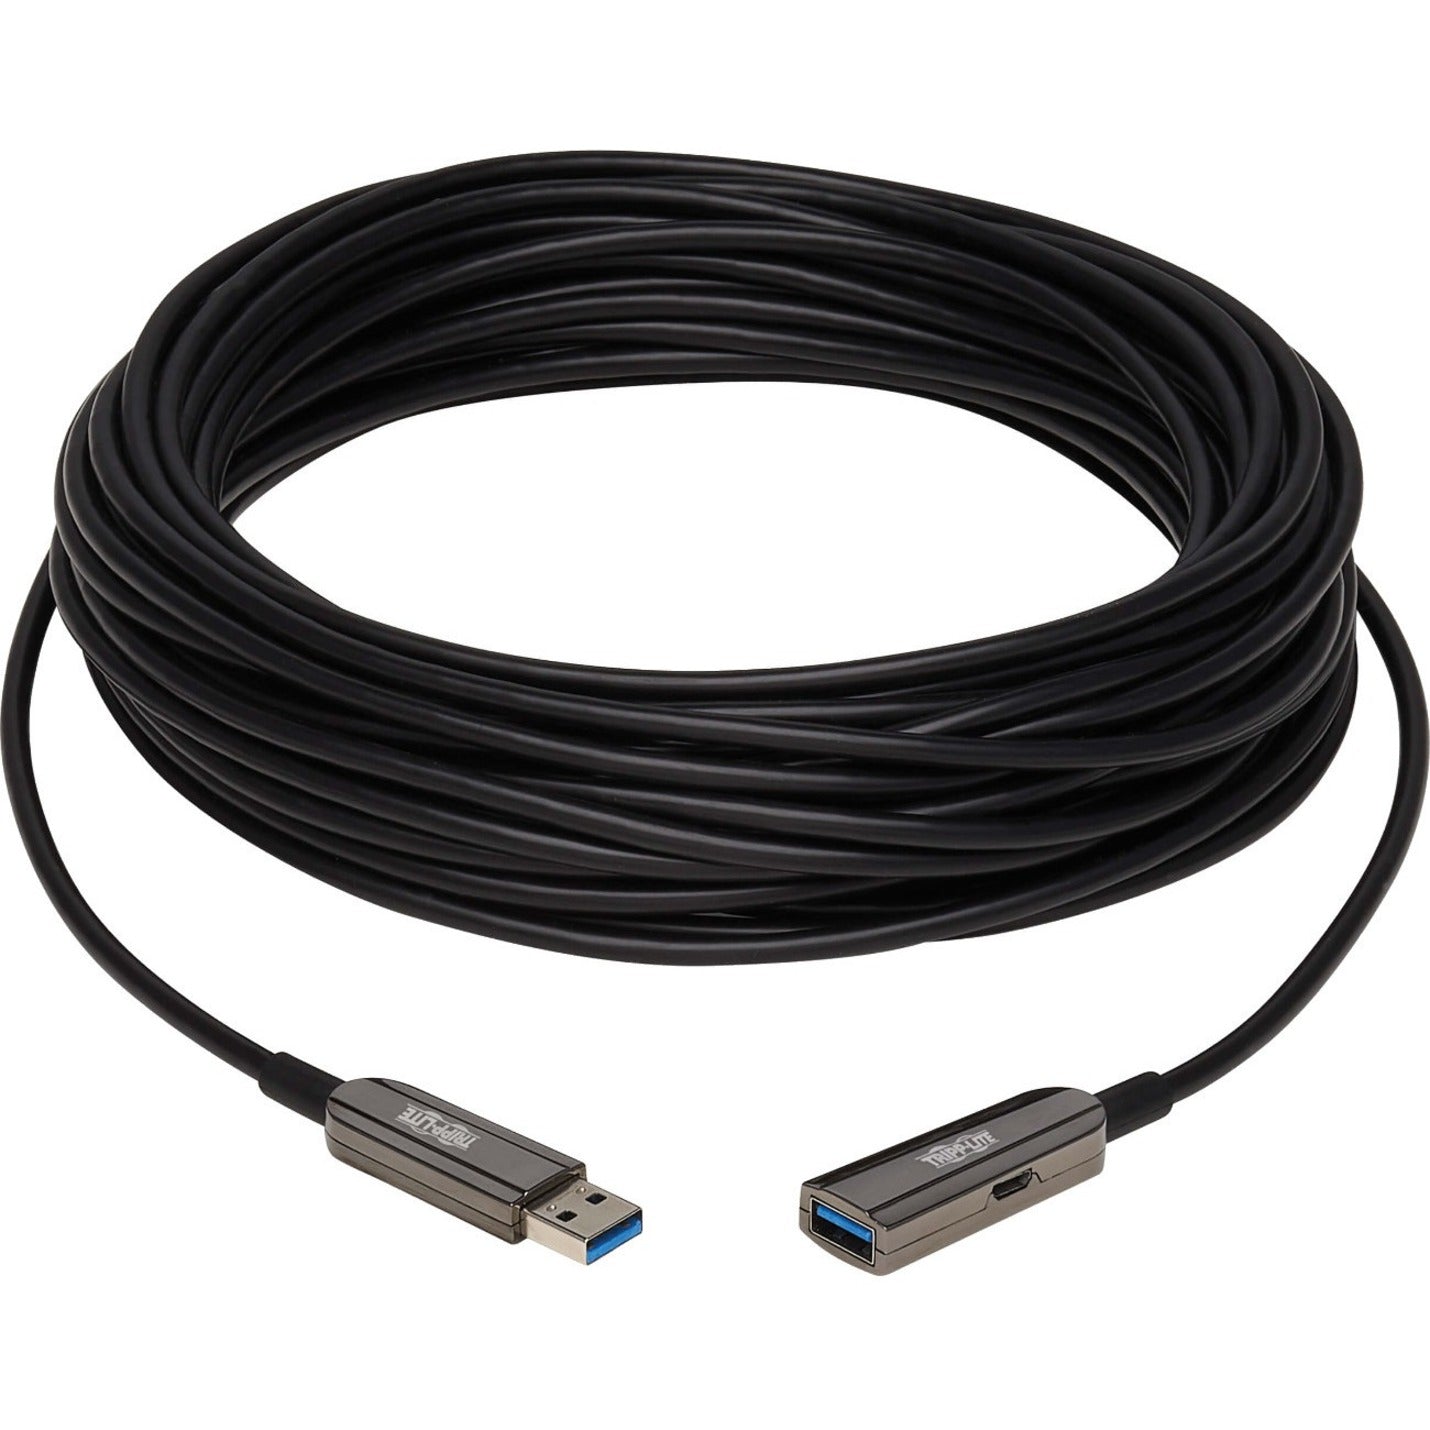 Tripp Lite U330F-15M-G1 Fiber Optic Extension Data Transfer Cable, 49 ft, Signal Booster, Flexible, CL3-Rated, Black